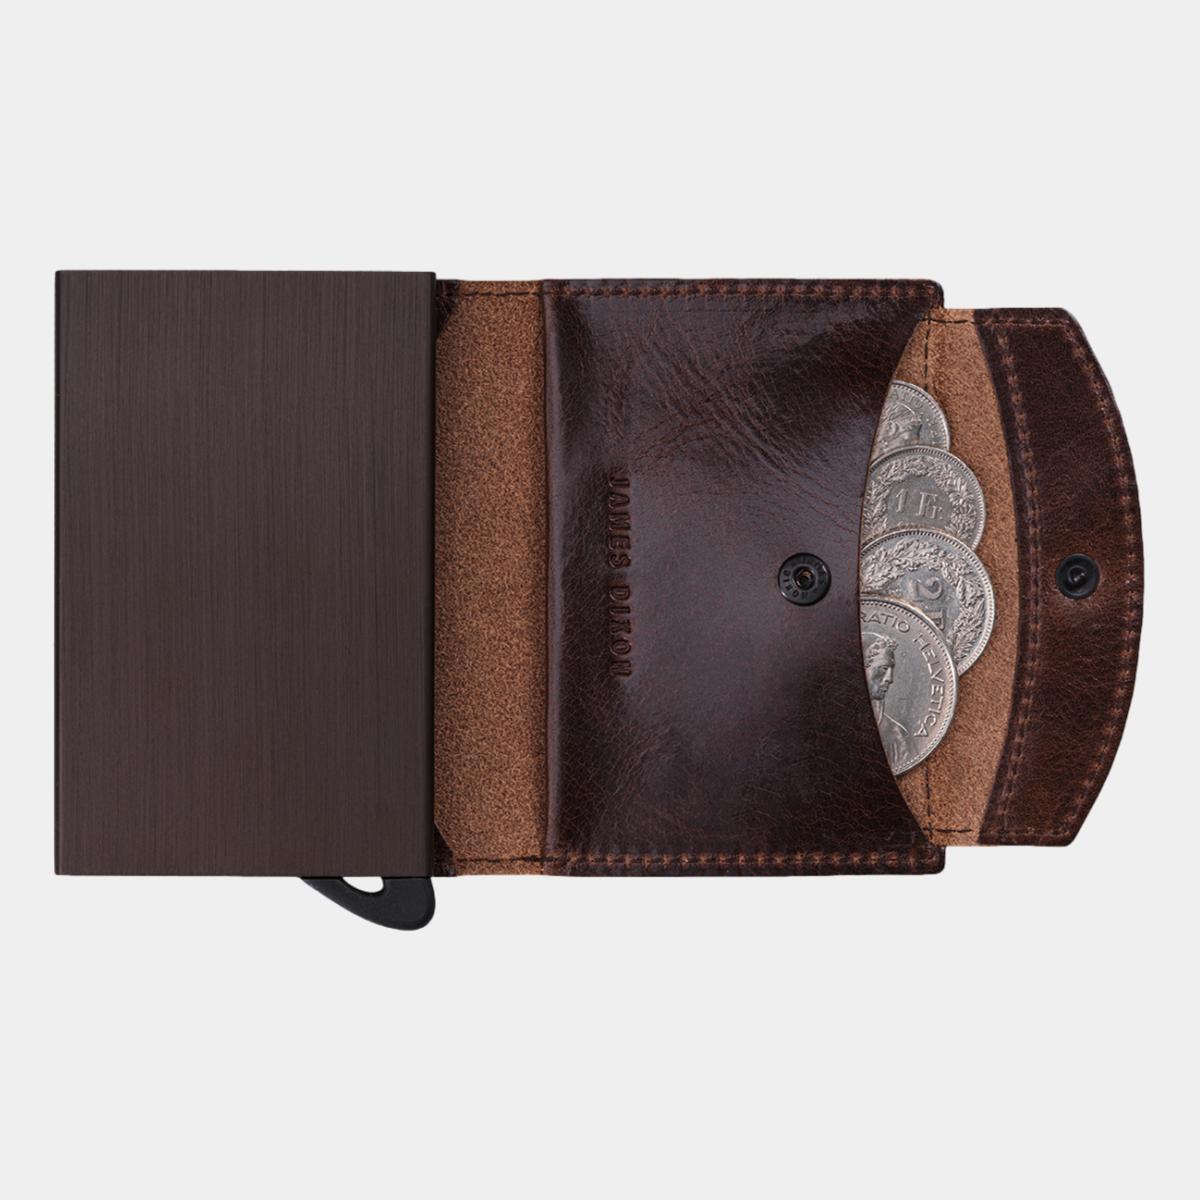 jd0049 james dixon puro classic cacao brown coin pocket wallet coins